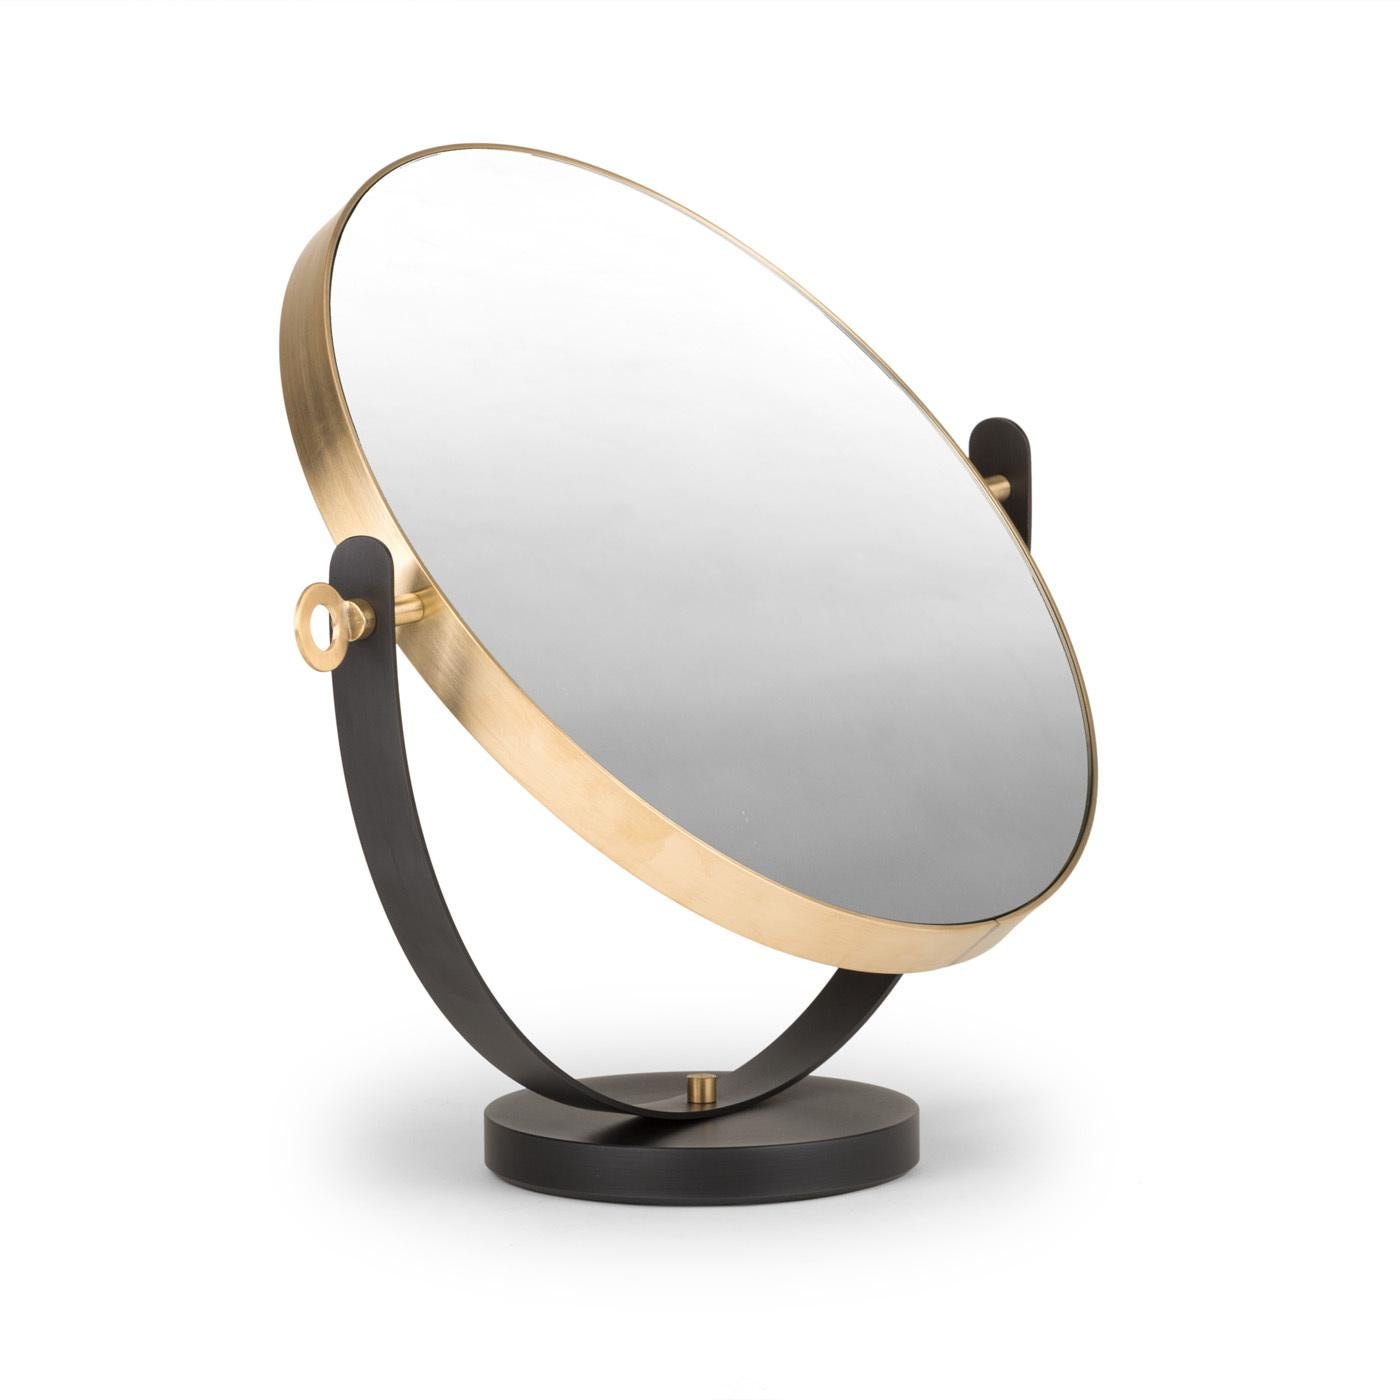 This elegant piece of functional decor was designed by Federica Biasi to honour Davide's father and founder of Mingardo workshop, Ilario and his collaborations with architect Carlo Scarpa. The round shape of the frame is inspired by the historical